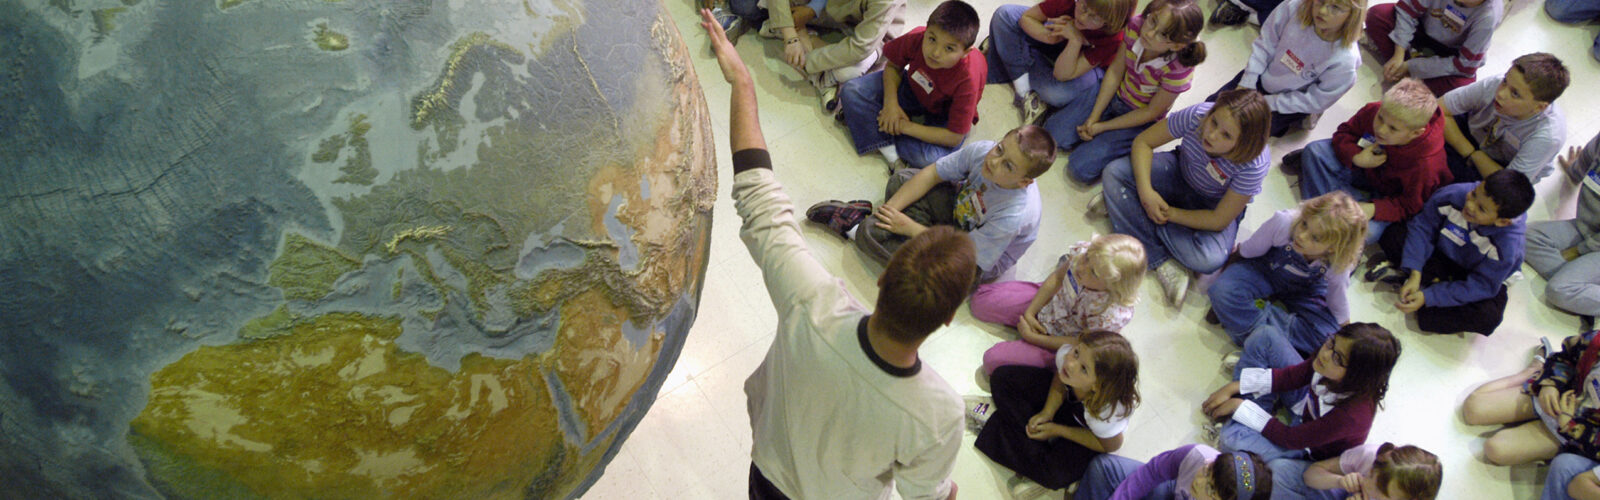 A tour guide shows children a large model of Earth